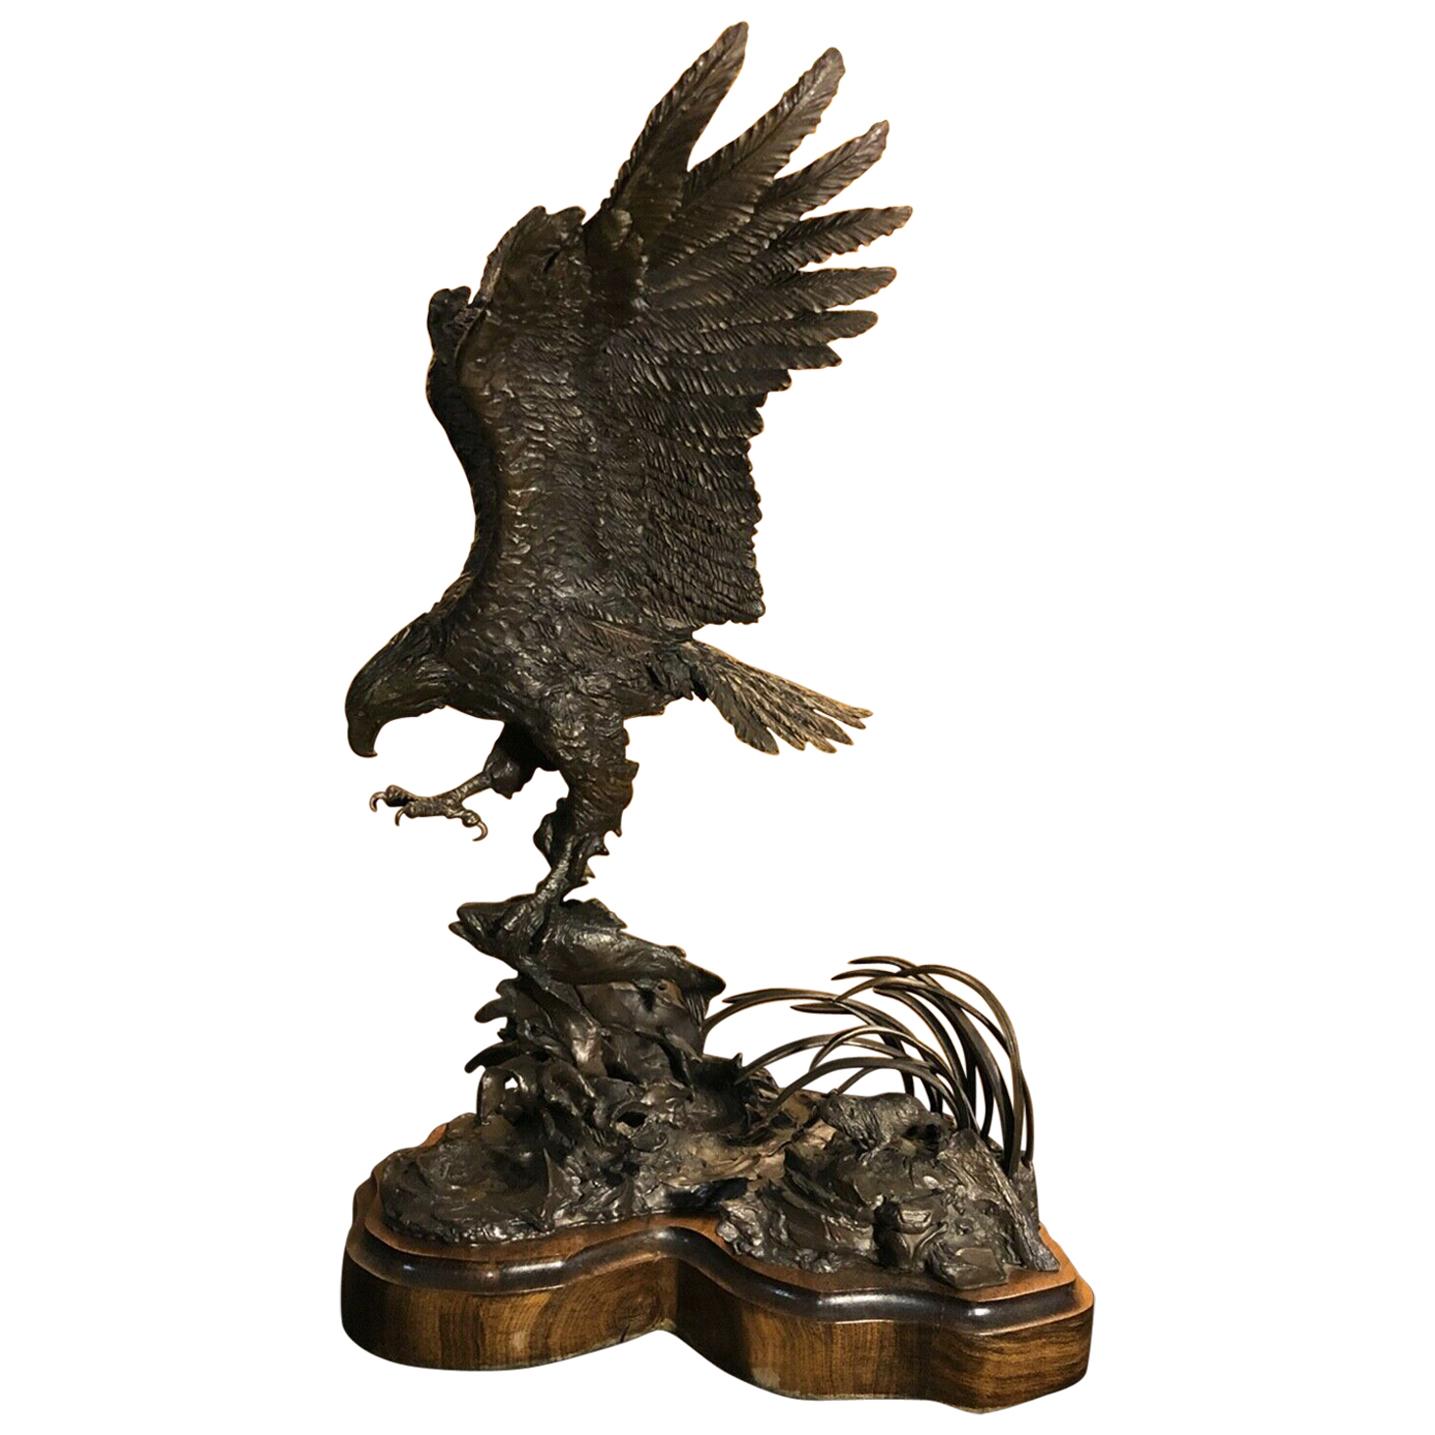 American Bald Eagle Bronze by Lorenzo Ghiglieri, Sold Out Edition #14/35, 1976